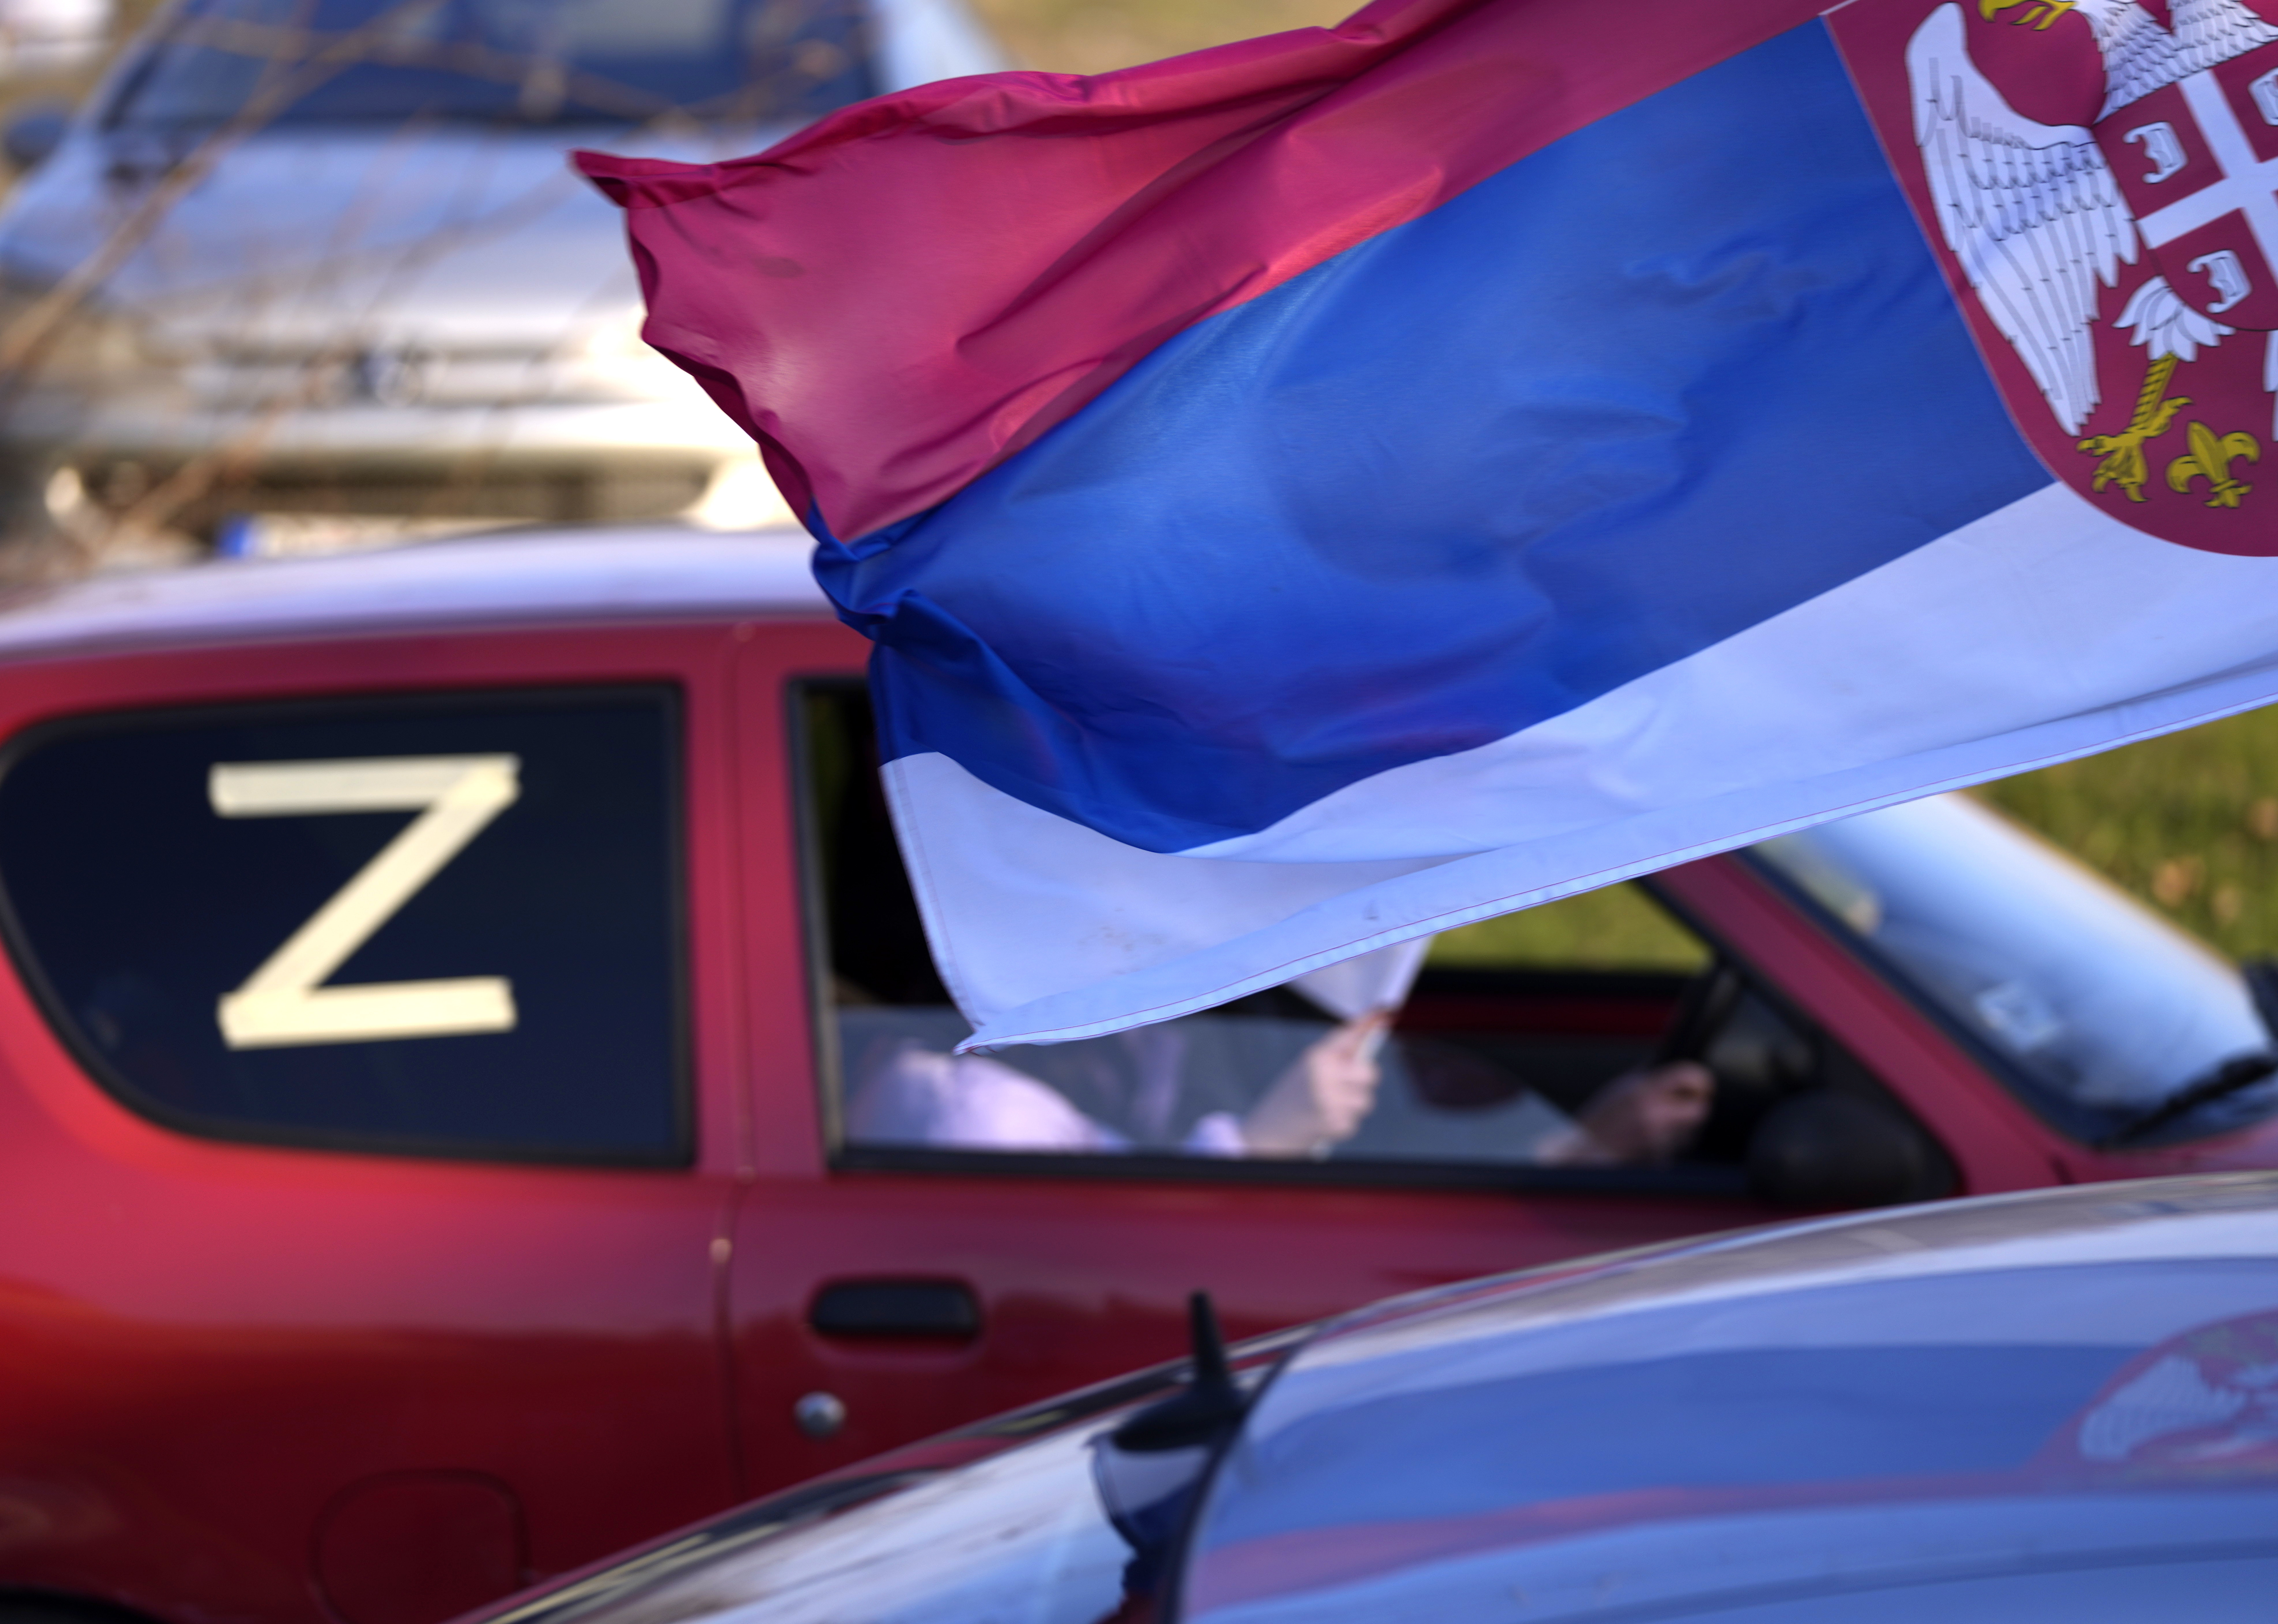 The letter Z on a car during a rally in support of Russia in Belgrade 